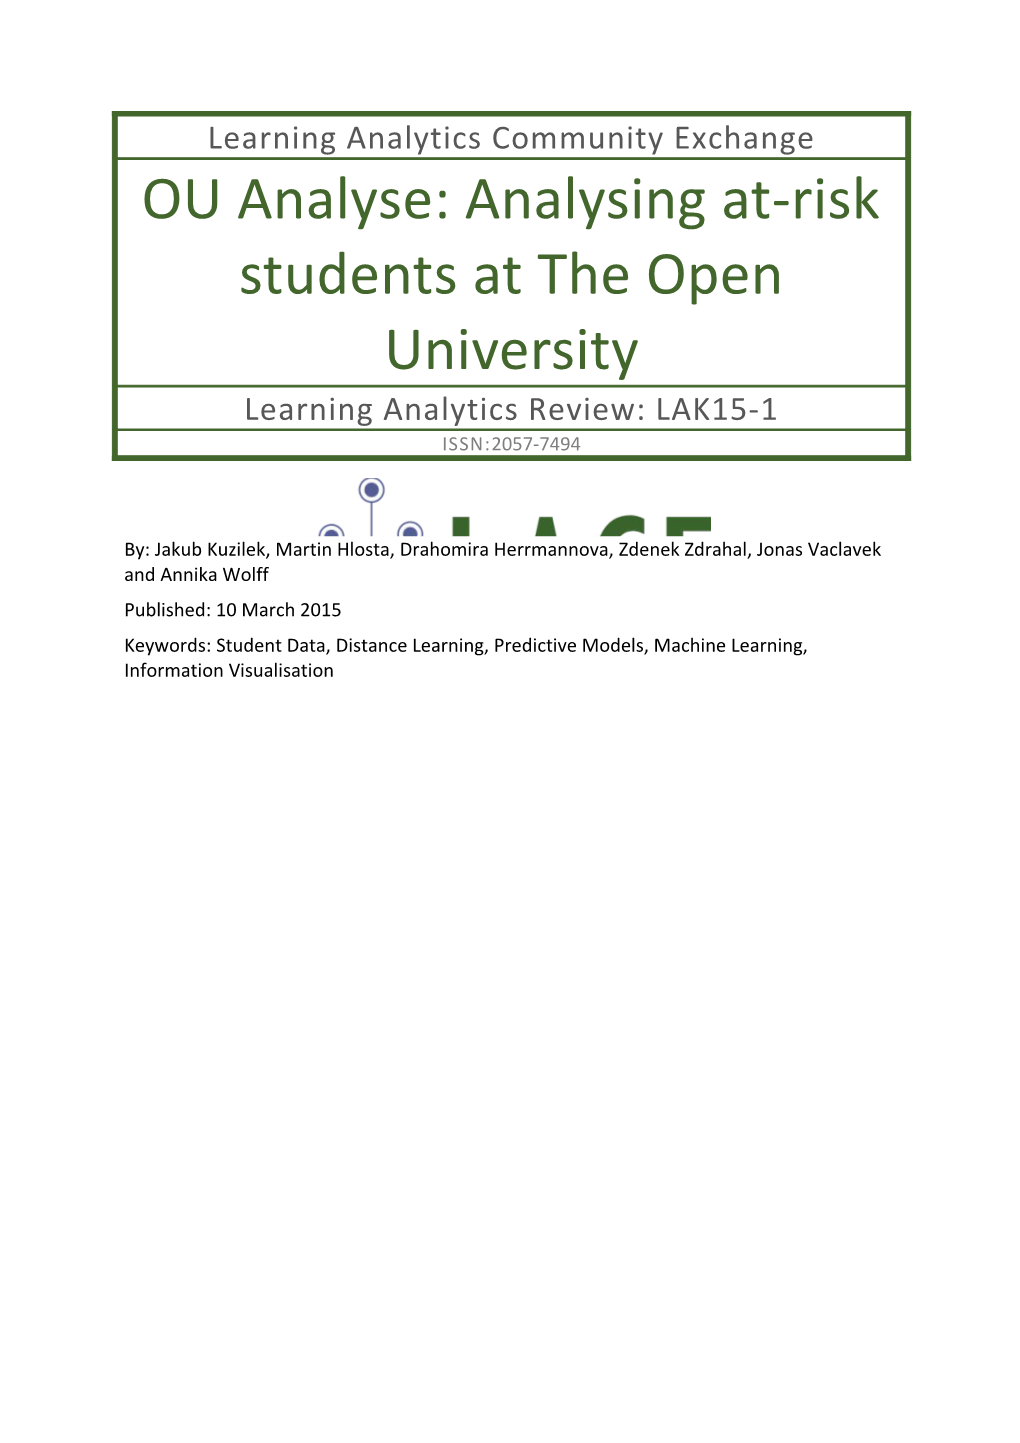 OU Analyse: Analysing At-Risk Students at the Open University